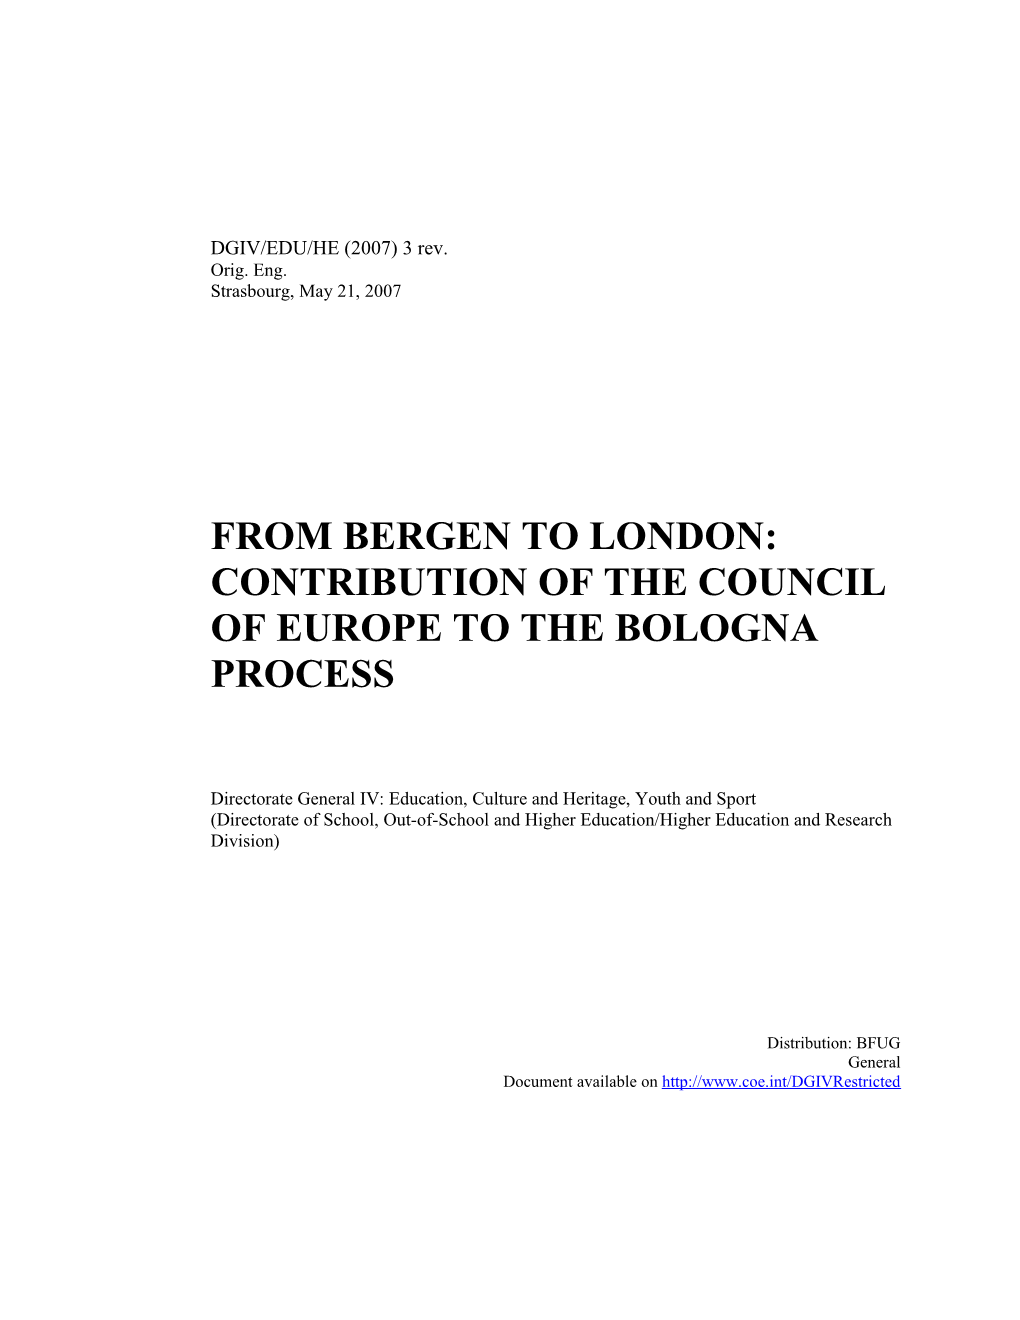 From Bergen to London: Contribution of the Council of Europe to the Bologna Process